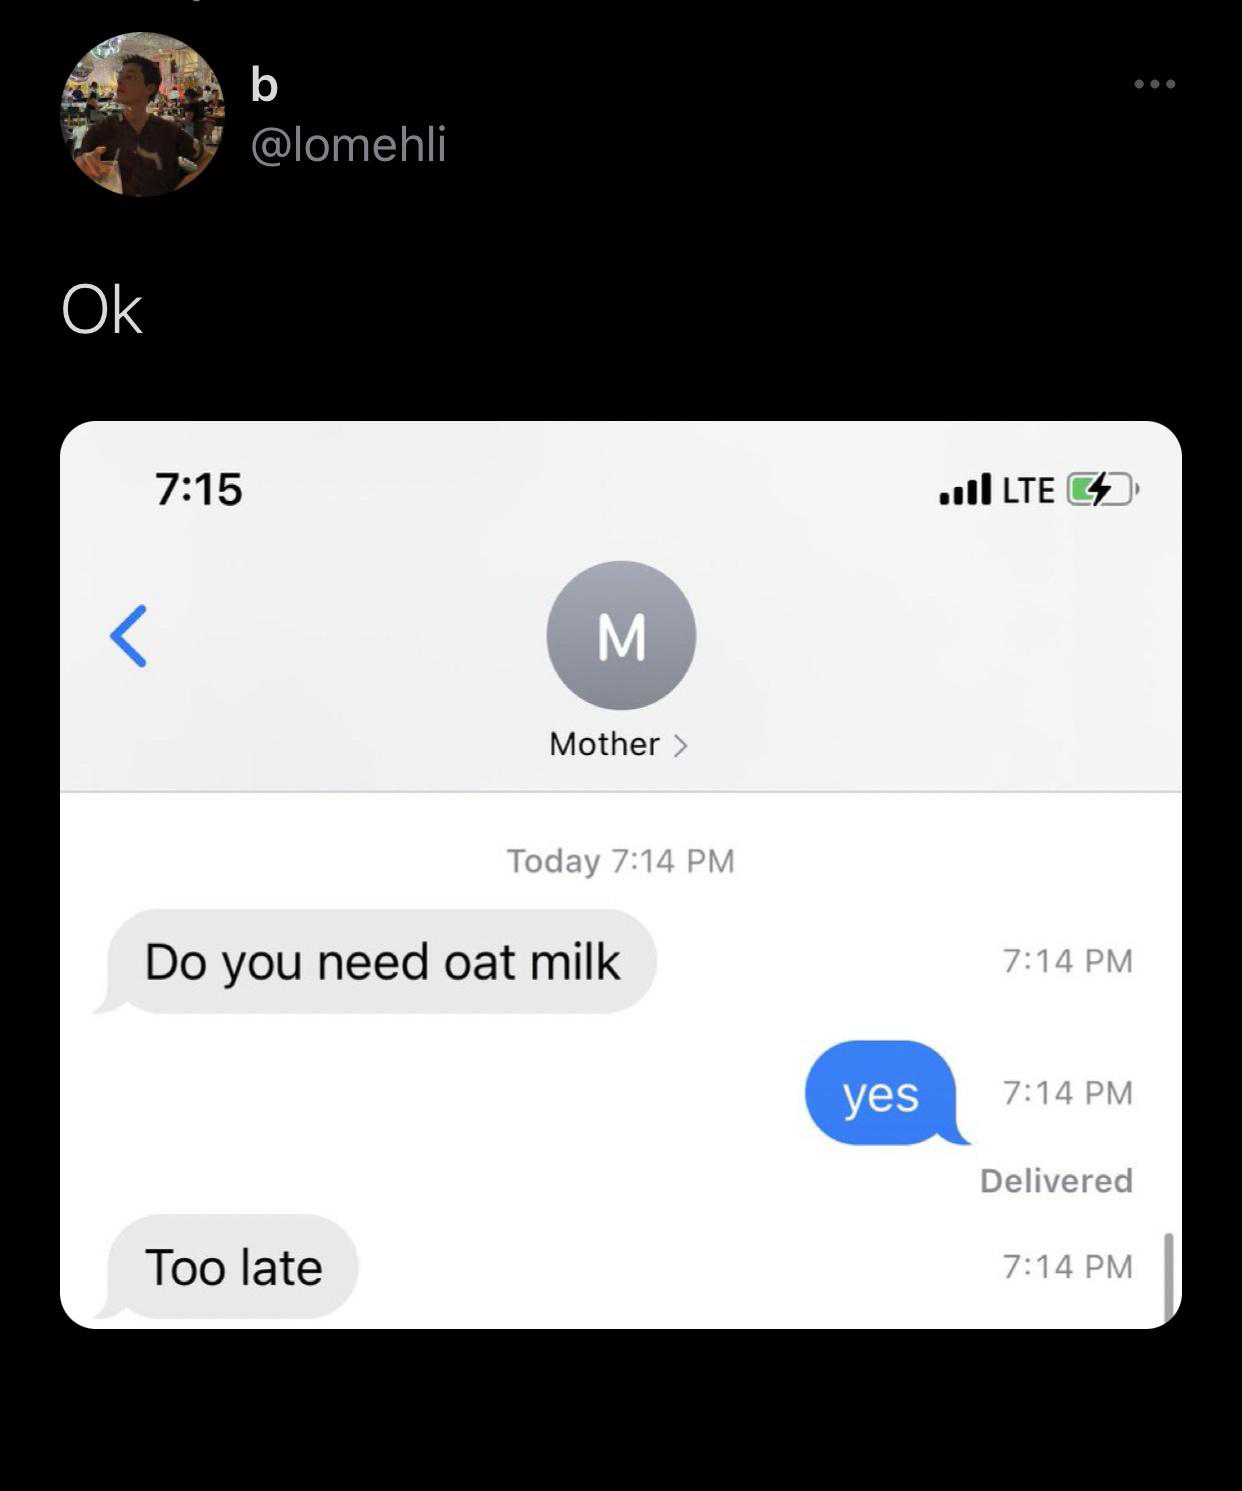 screenshot - b Ok ..|Lte C4 M Mother > Today Do you need oat milk yes Delivered Too late